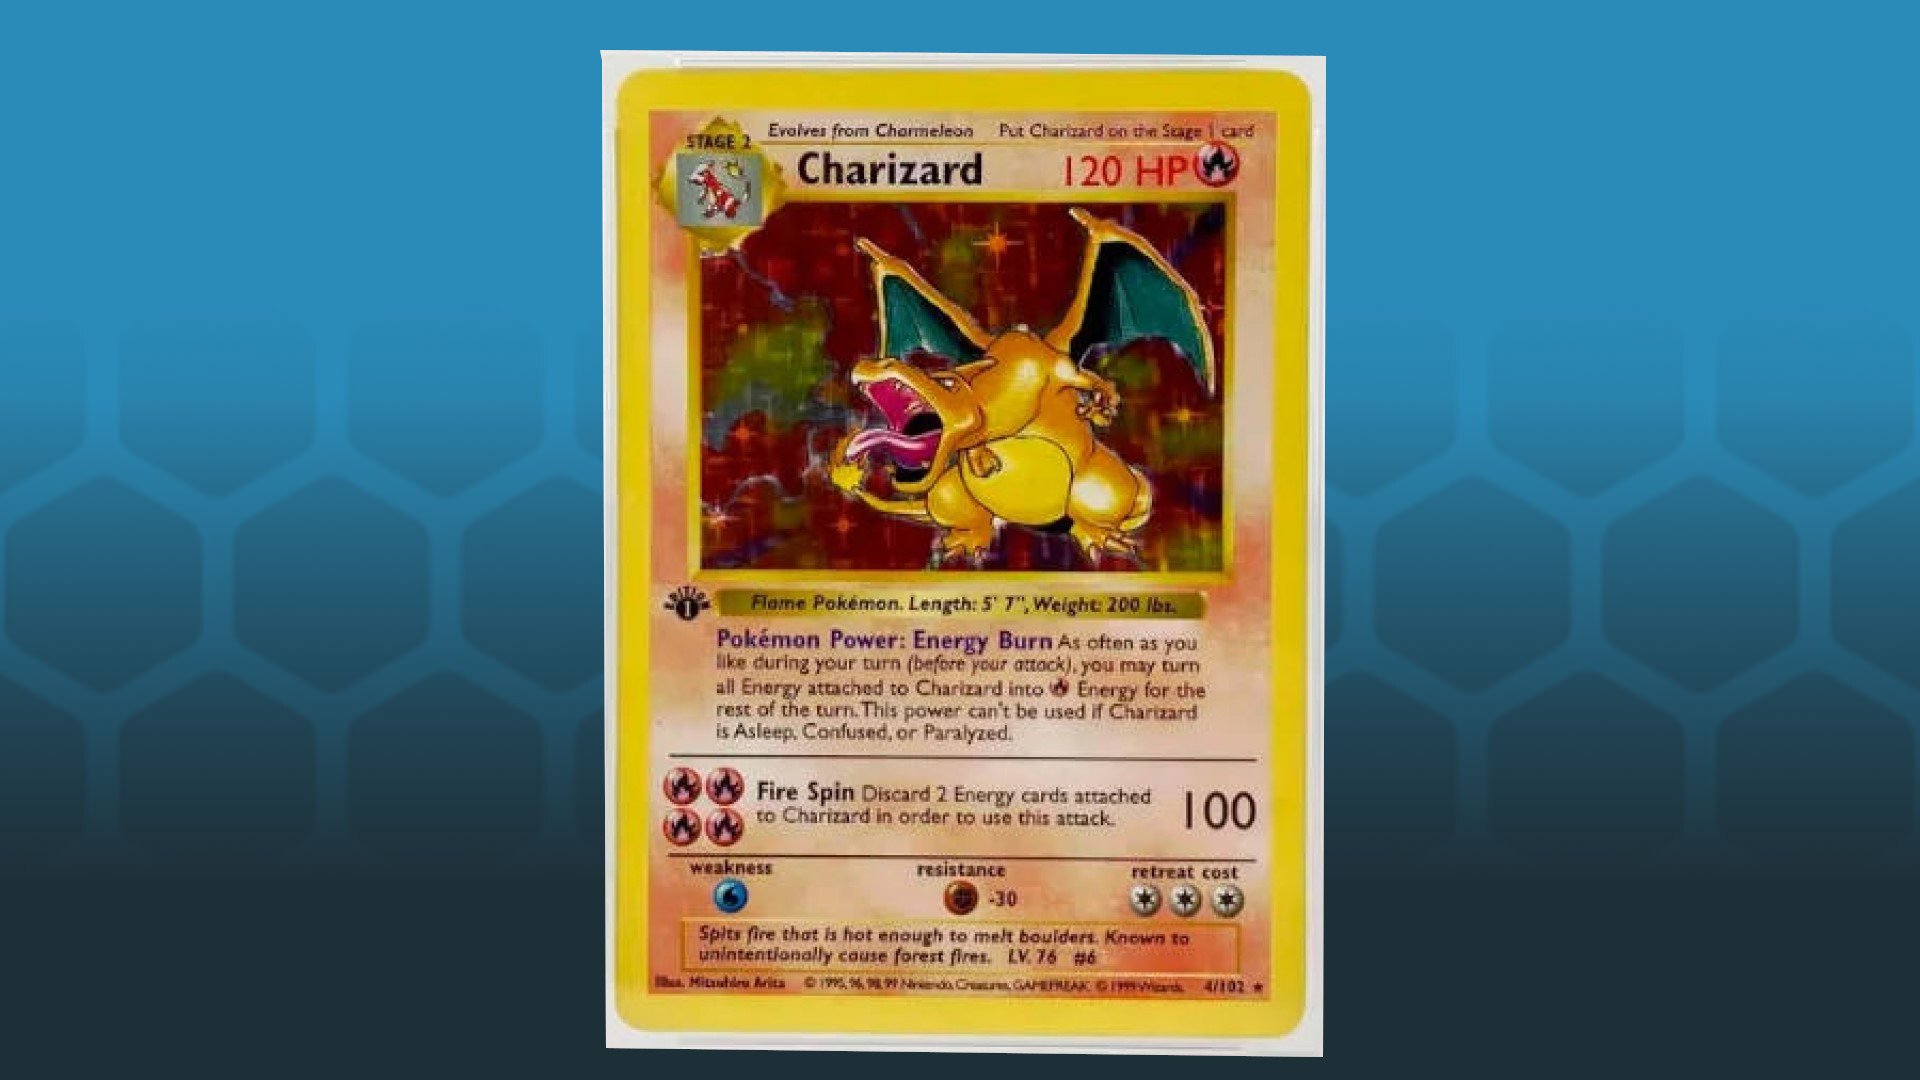 List of All Crystal type 9 Pokemon cards [Japanese] Let's check